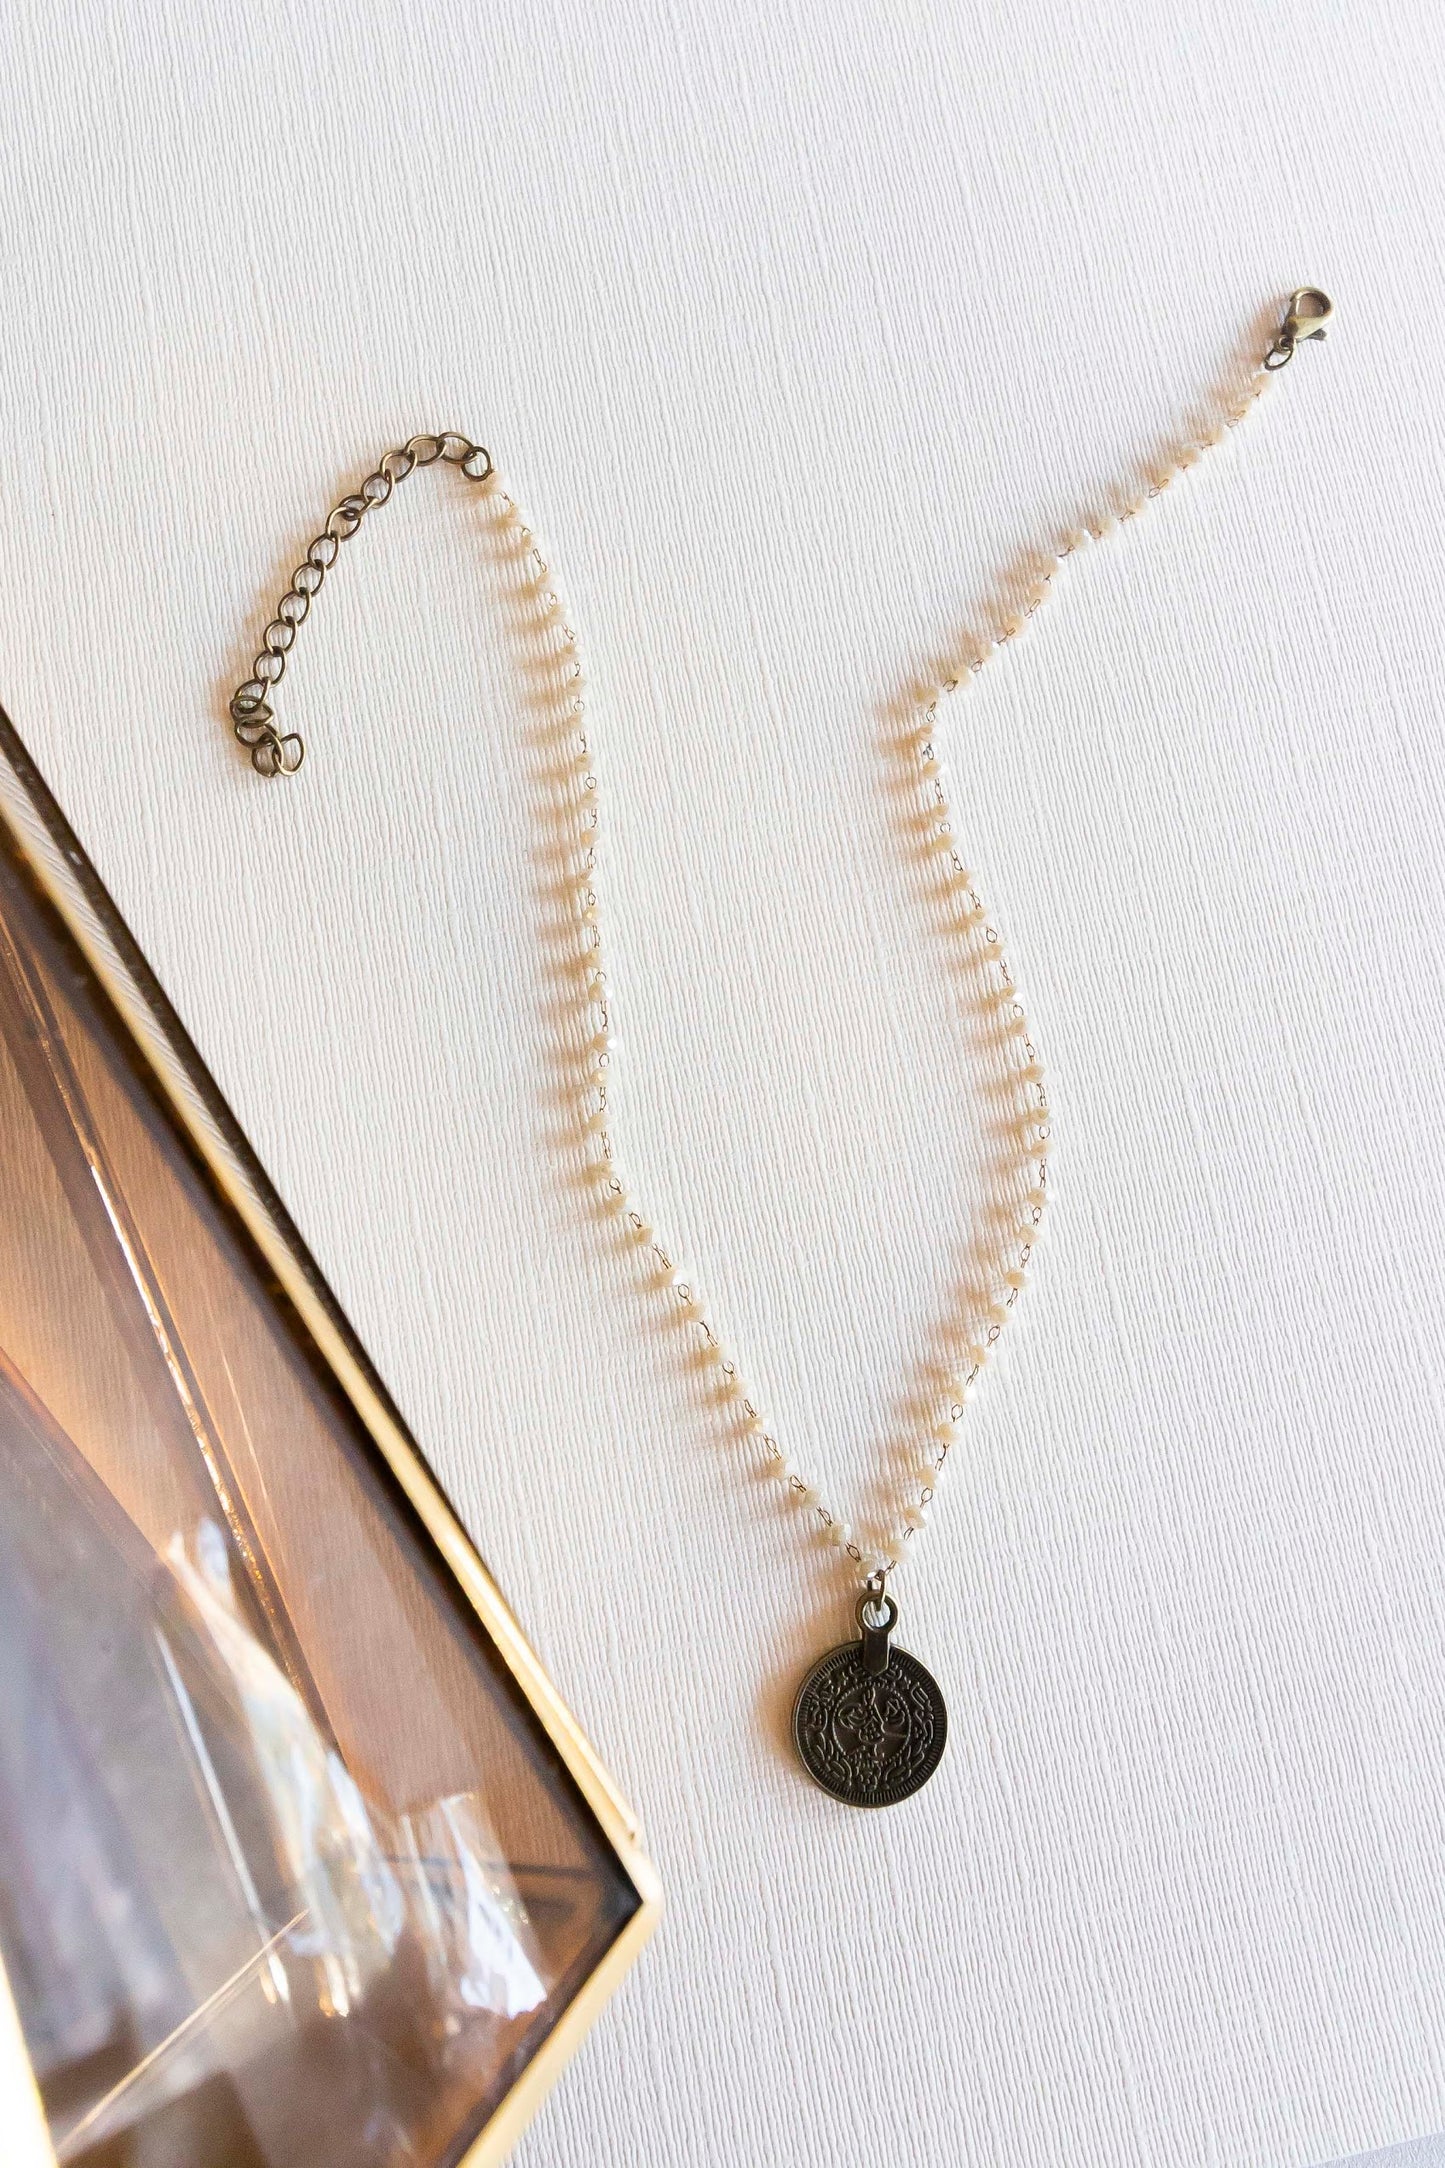 Jane Bronze Pendant Necklace | Dainty Renaissance Short Necklace | Cream Beads and Burnished Bronze Coin Pendant | Victorian Ancient Coin Charm